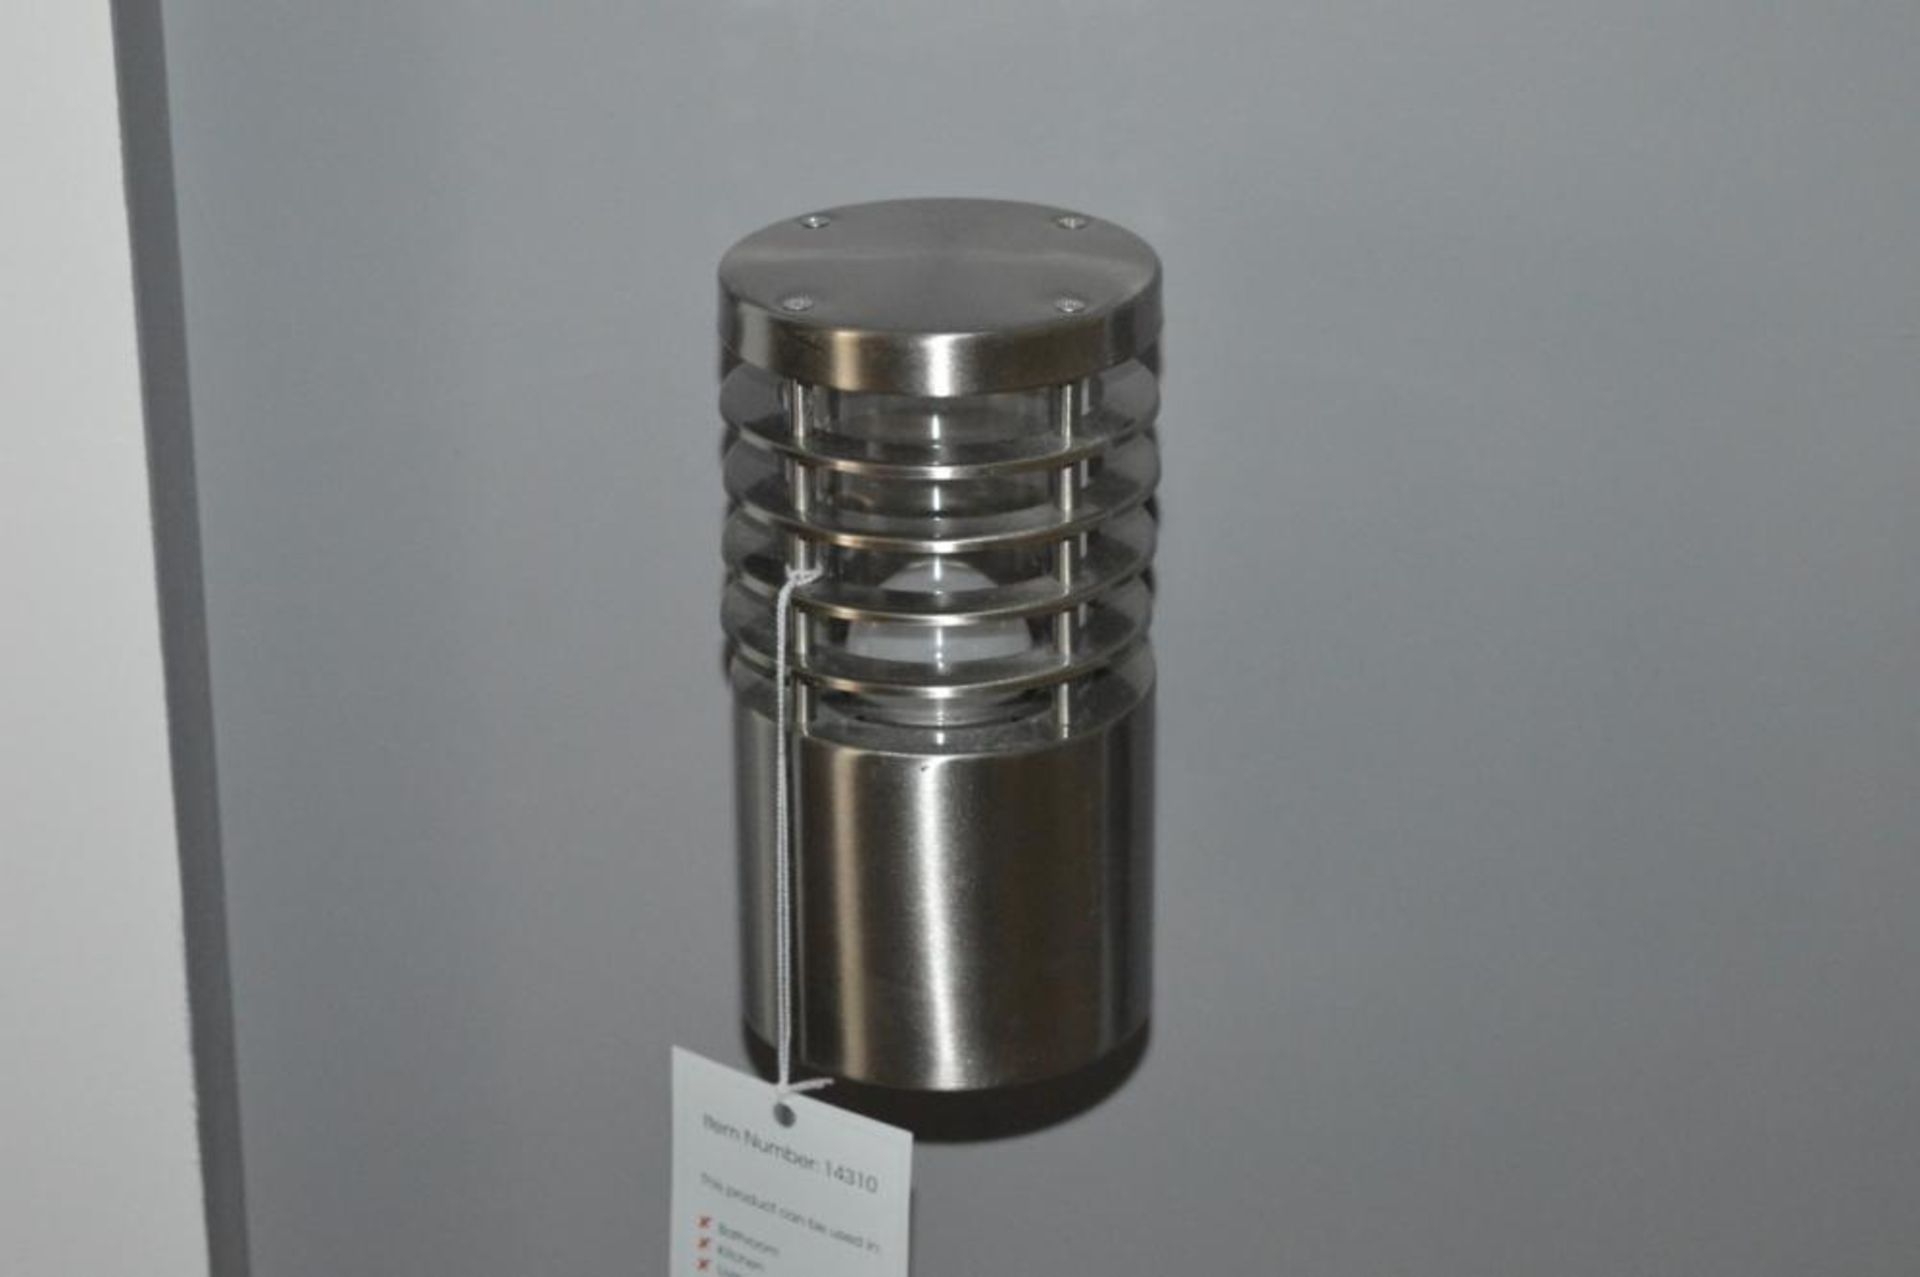 1 x Outdoor Light With A Bracket In Stainless Steel and Clear Polycarbonate - Ex Display Stock - CL2 - Image 2 of 3